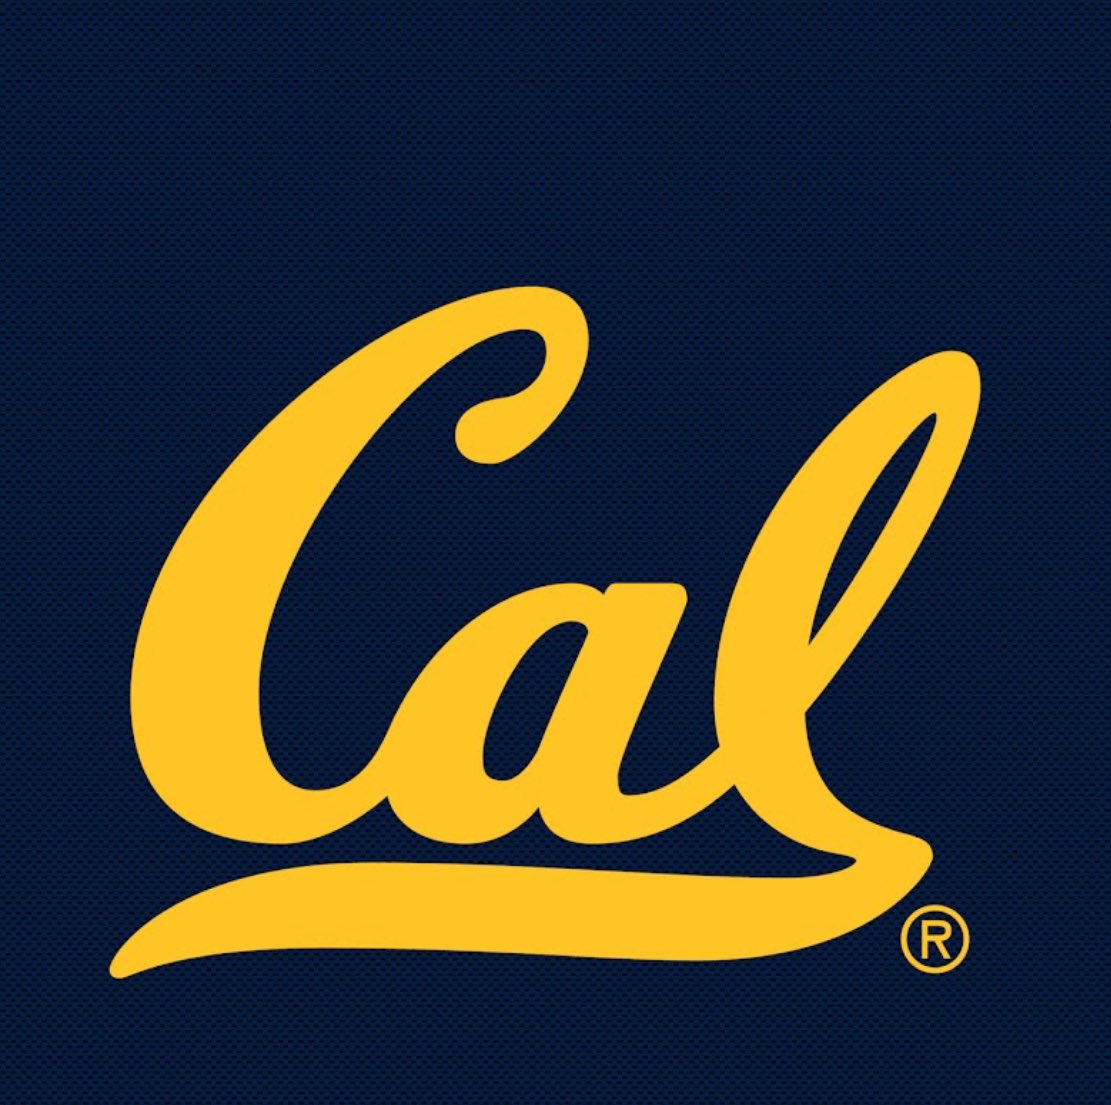 After a great visit and talk with @MikeBloesch and @Coach_Leighton I’m grateful and honored to have received an offer to Cal Berkeley. @lhslionsfb @CoachMikeCable @DavidReinders @NCSA_Football @BrandonHuffman